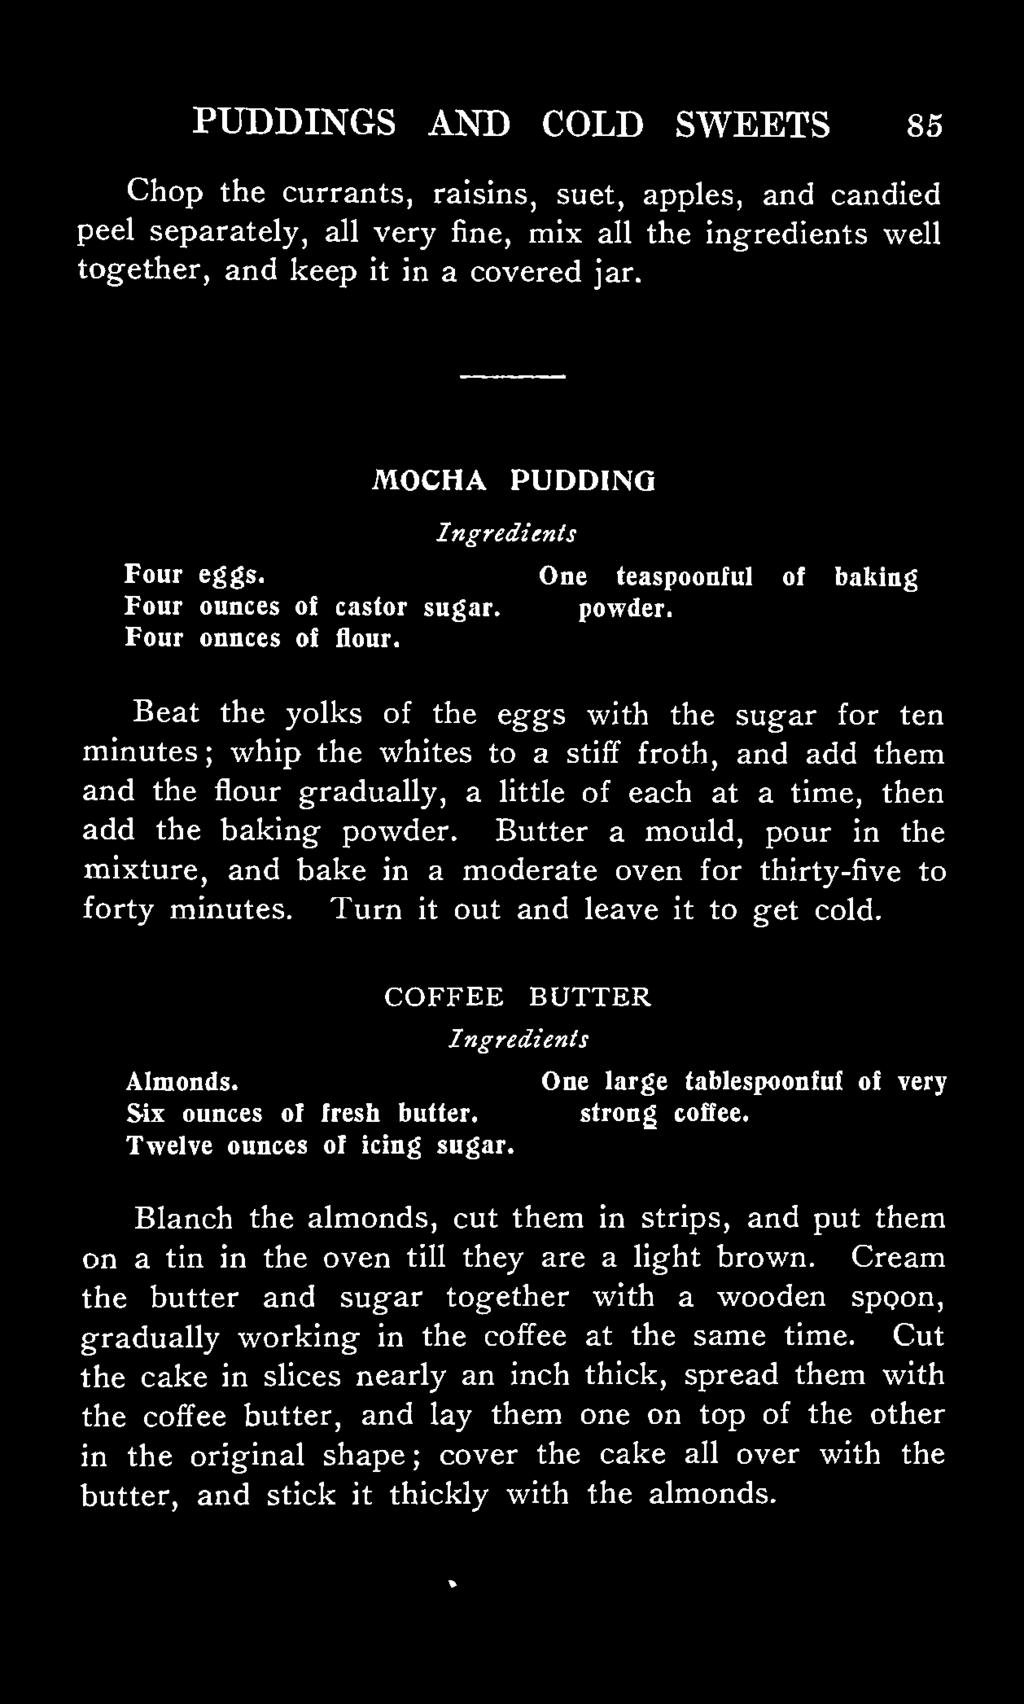 Beat the yolks of the eggs with the sugar for ten minutes ; whip the whites to a stiff froth, and add them and the flour gradually, a little of each at a time, then add the baking powder.